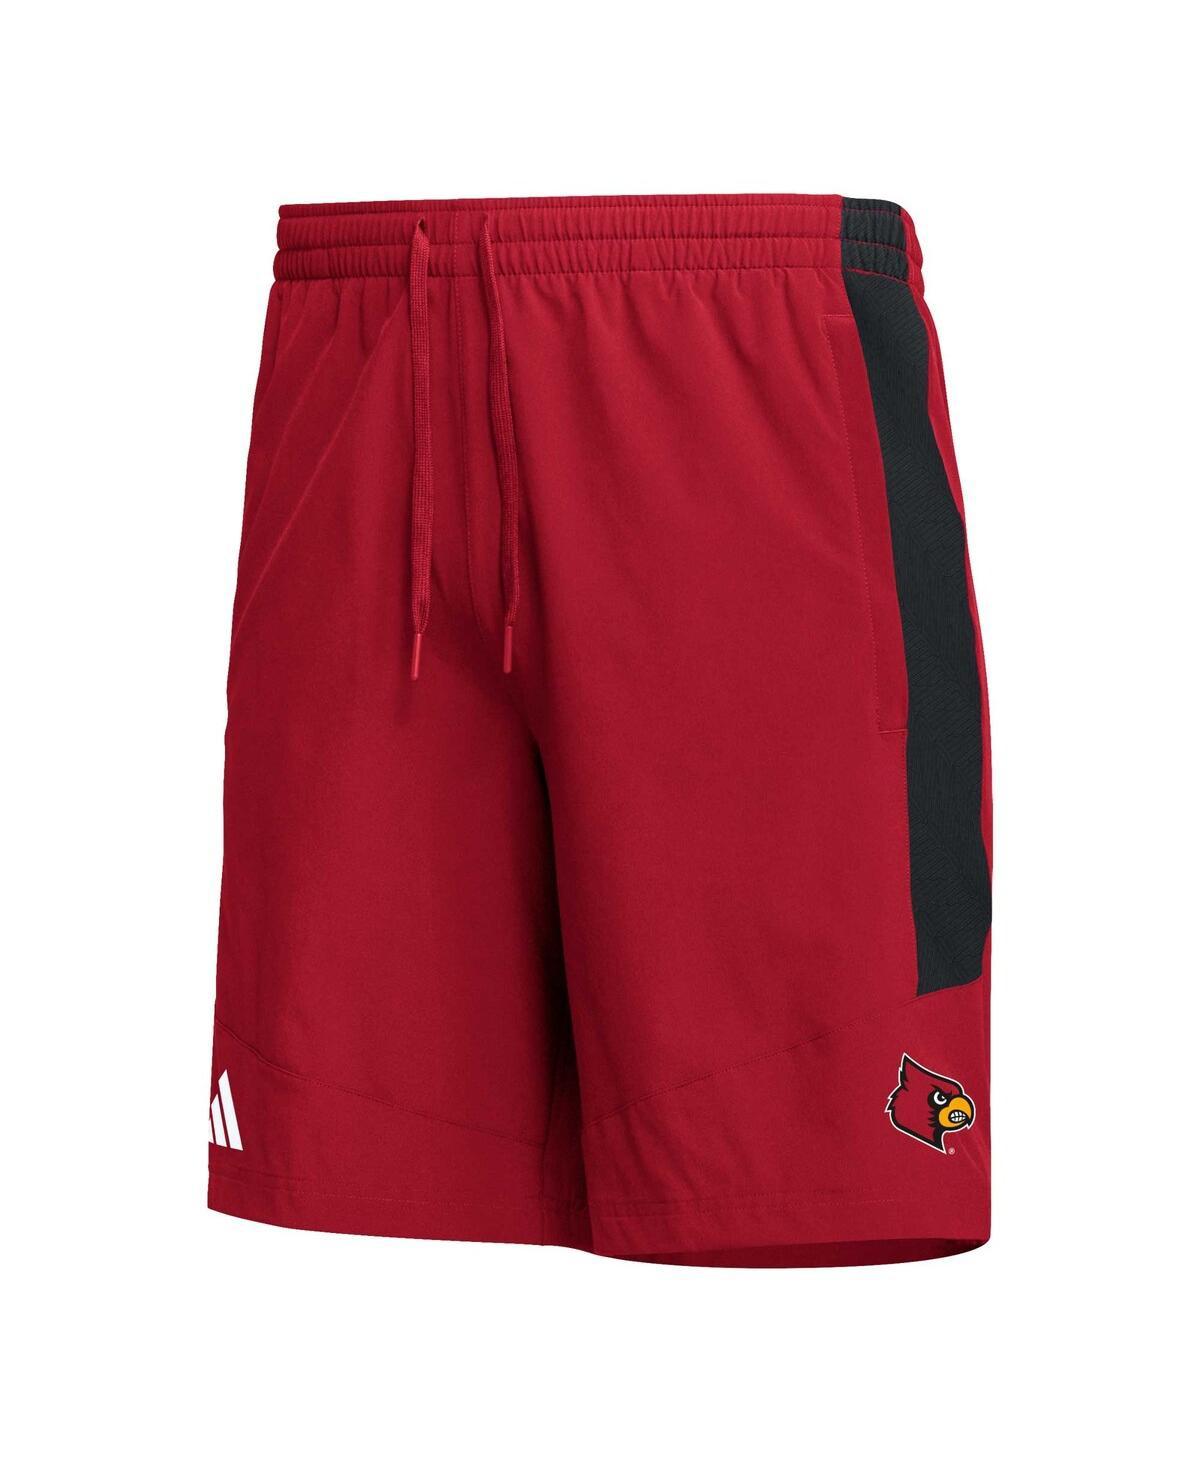 Louisville Cardinals adidas Athletic Pants Women's Black/Red New XL